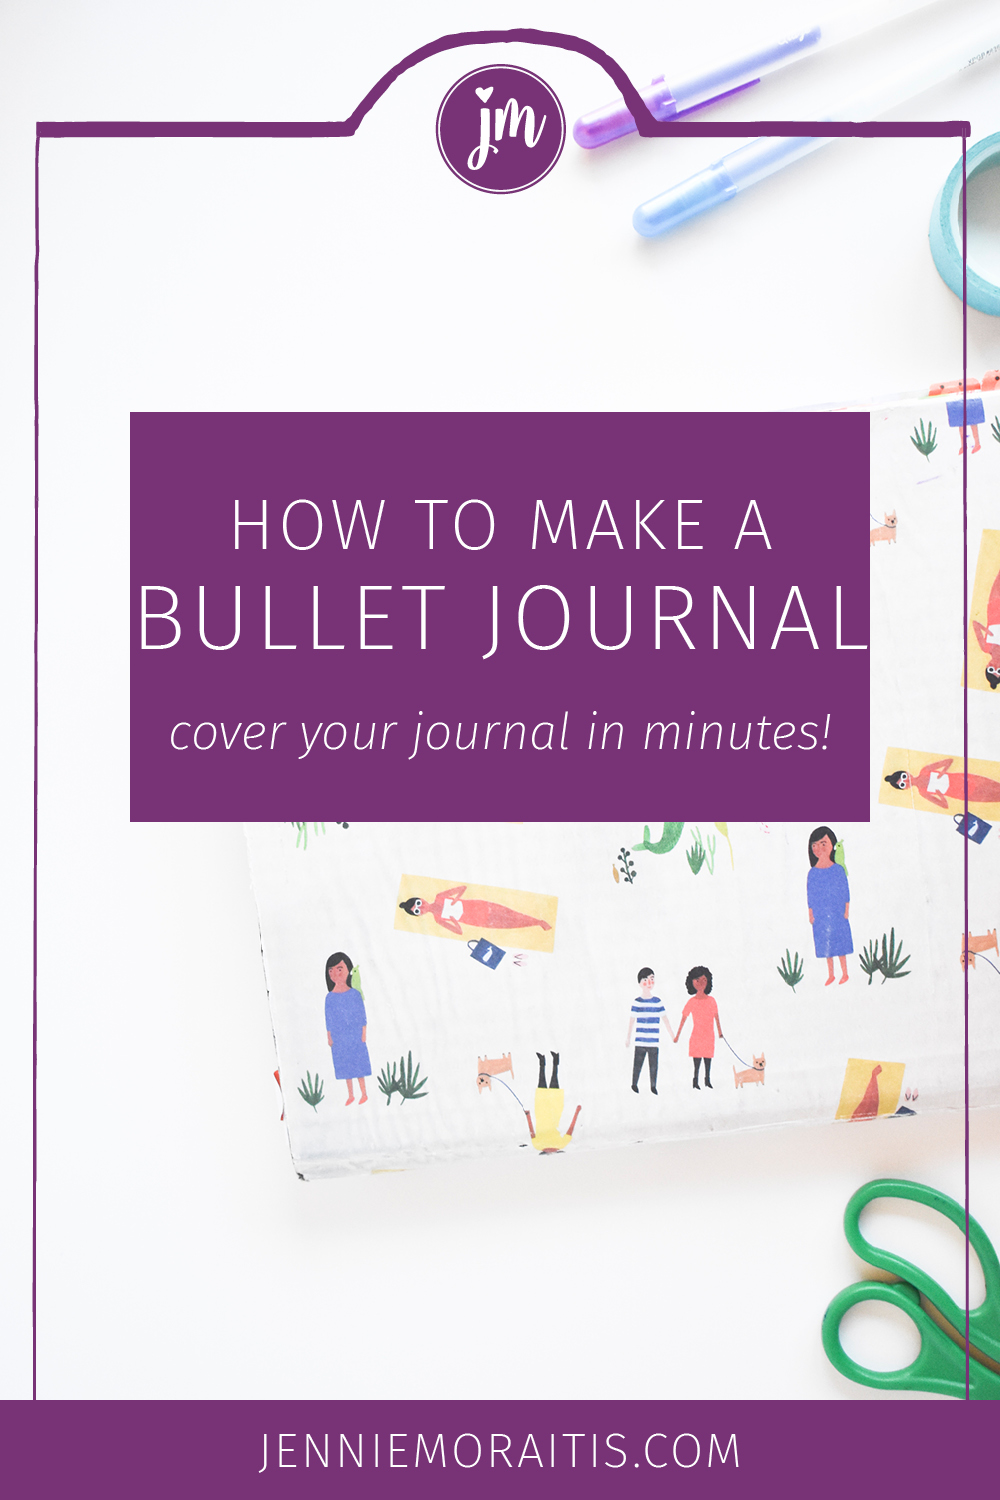 Learn how to cover your bullet journal with just a few basic supplies! This is such a great way to personalize your bullet journal without spending a lot of time doing so. :)